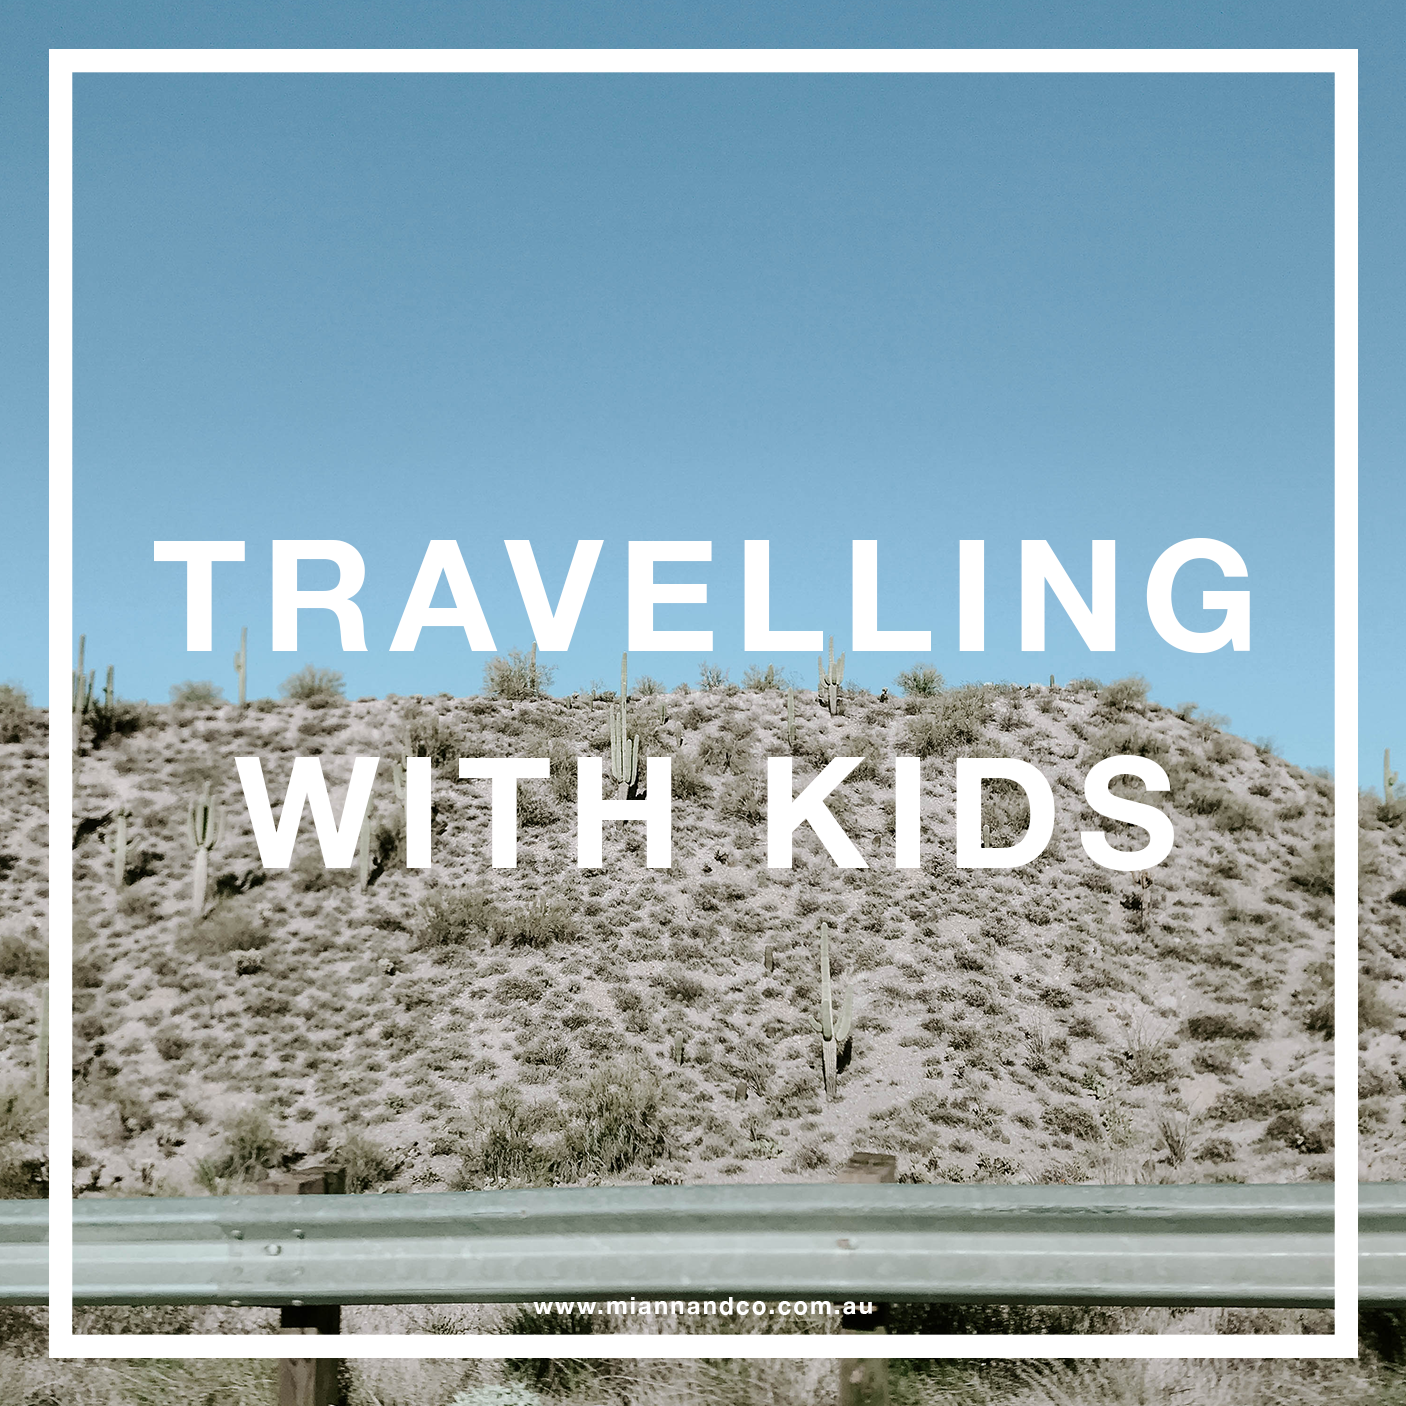 Travelling with kids